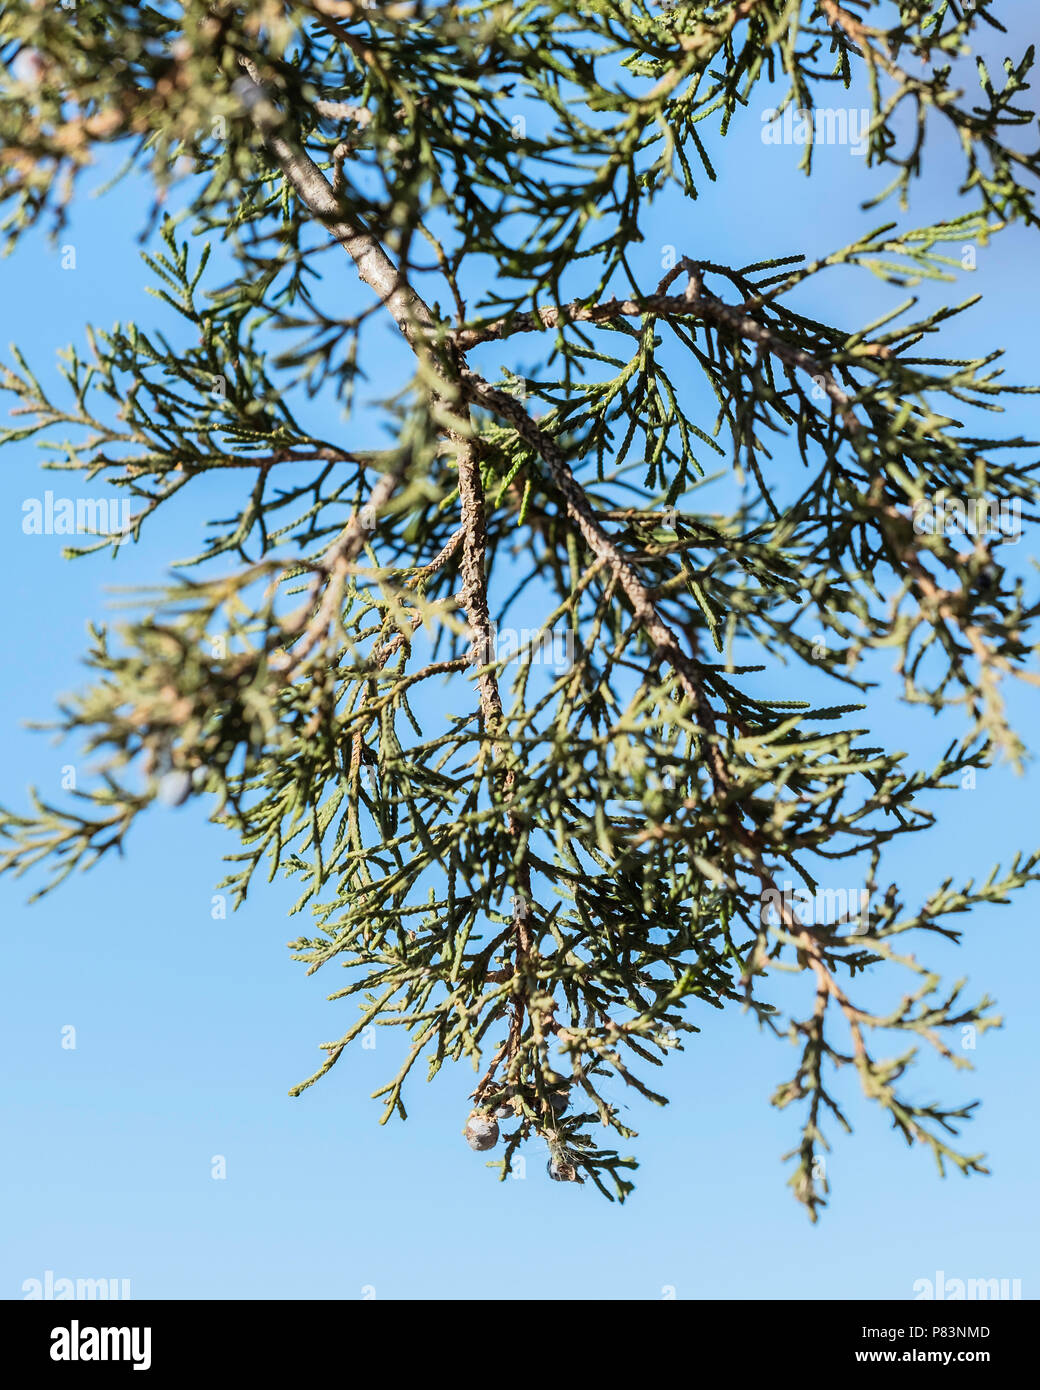 A branch of Juniperus virginiana or Eastern Red Cedar in December, with a single berry. Oklahoma, USA. Stock Photo